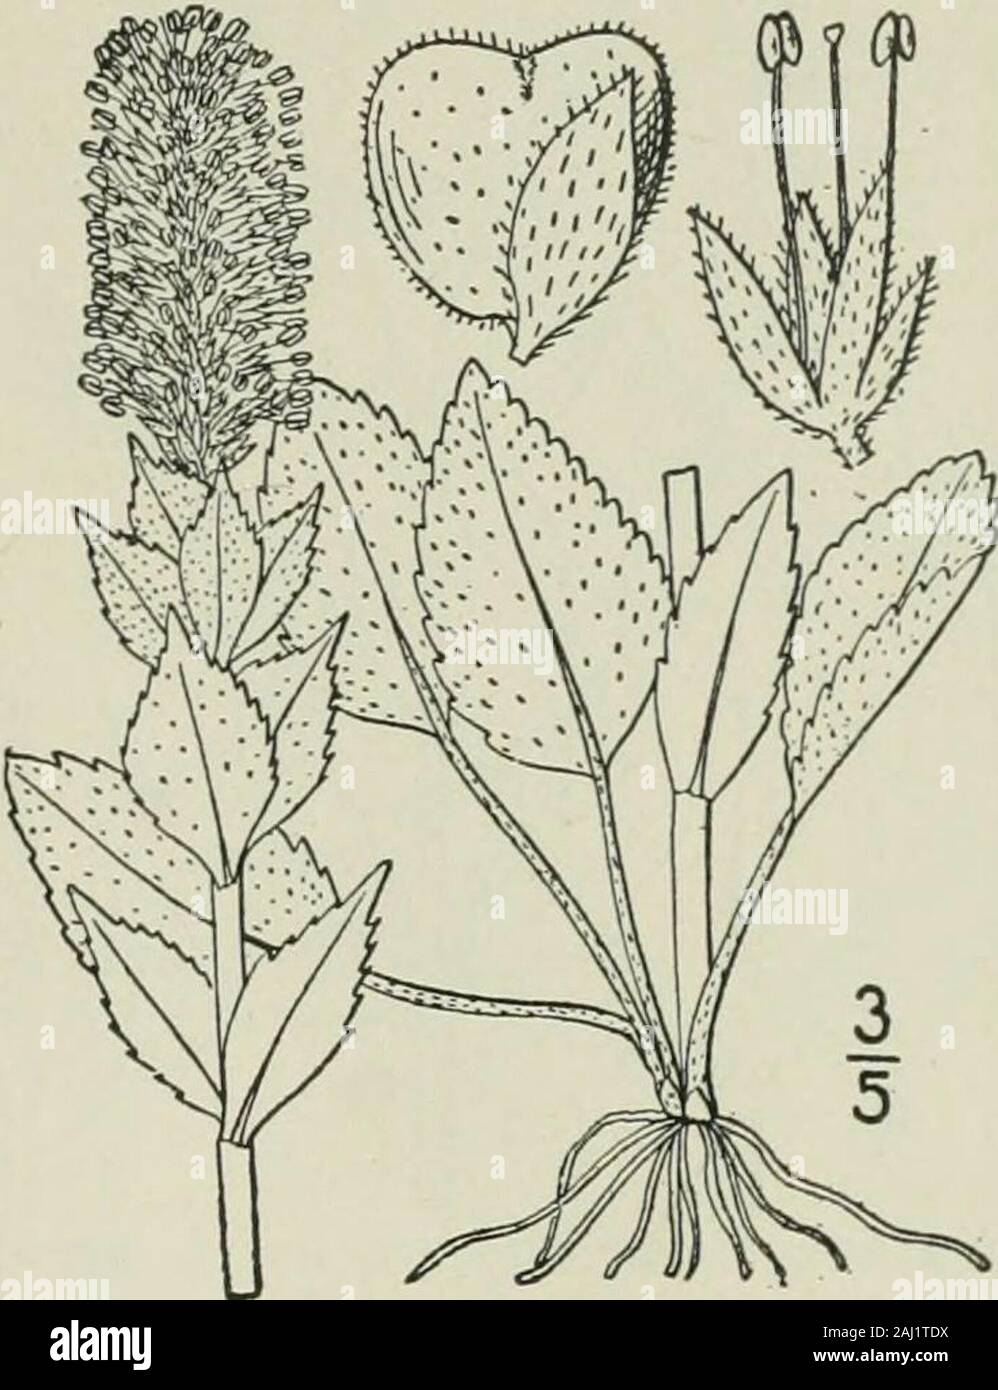 An illustrated flora of the northern United States, Canada and the British possessions : from Newfoundland to the parallel of the southern boundary of Virginia and from the Atlantic Ocean westward to the 102nd meridian . Genus 22. FIGWORT FAMILY. 199 2, Synthyris rubra (Hook.) Benth. Western Synthyris. Fig. 3795. Gymnandra rubra Hook. Fl. Bor. Amer. 2: 103. pi. 172.1838. Synthyris rubra Benth. in DC. Prodr. 10: 455. 1846. Wulfenia rubra Greene, Erythea 2: 83. 1894. Besseya rubra Rydberg, Bull. Torr. Club 30: 280. 1903- Similar to the preceding species but lower, pubescentor tomentose, seldom o Stock Photo